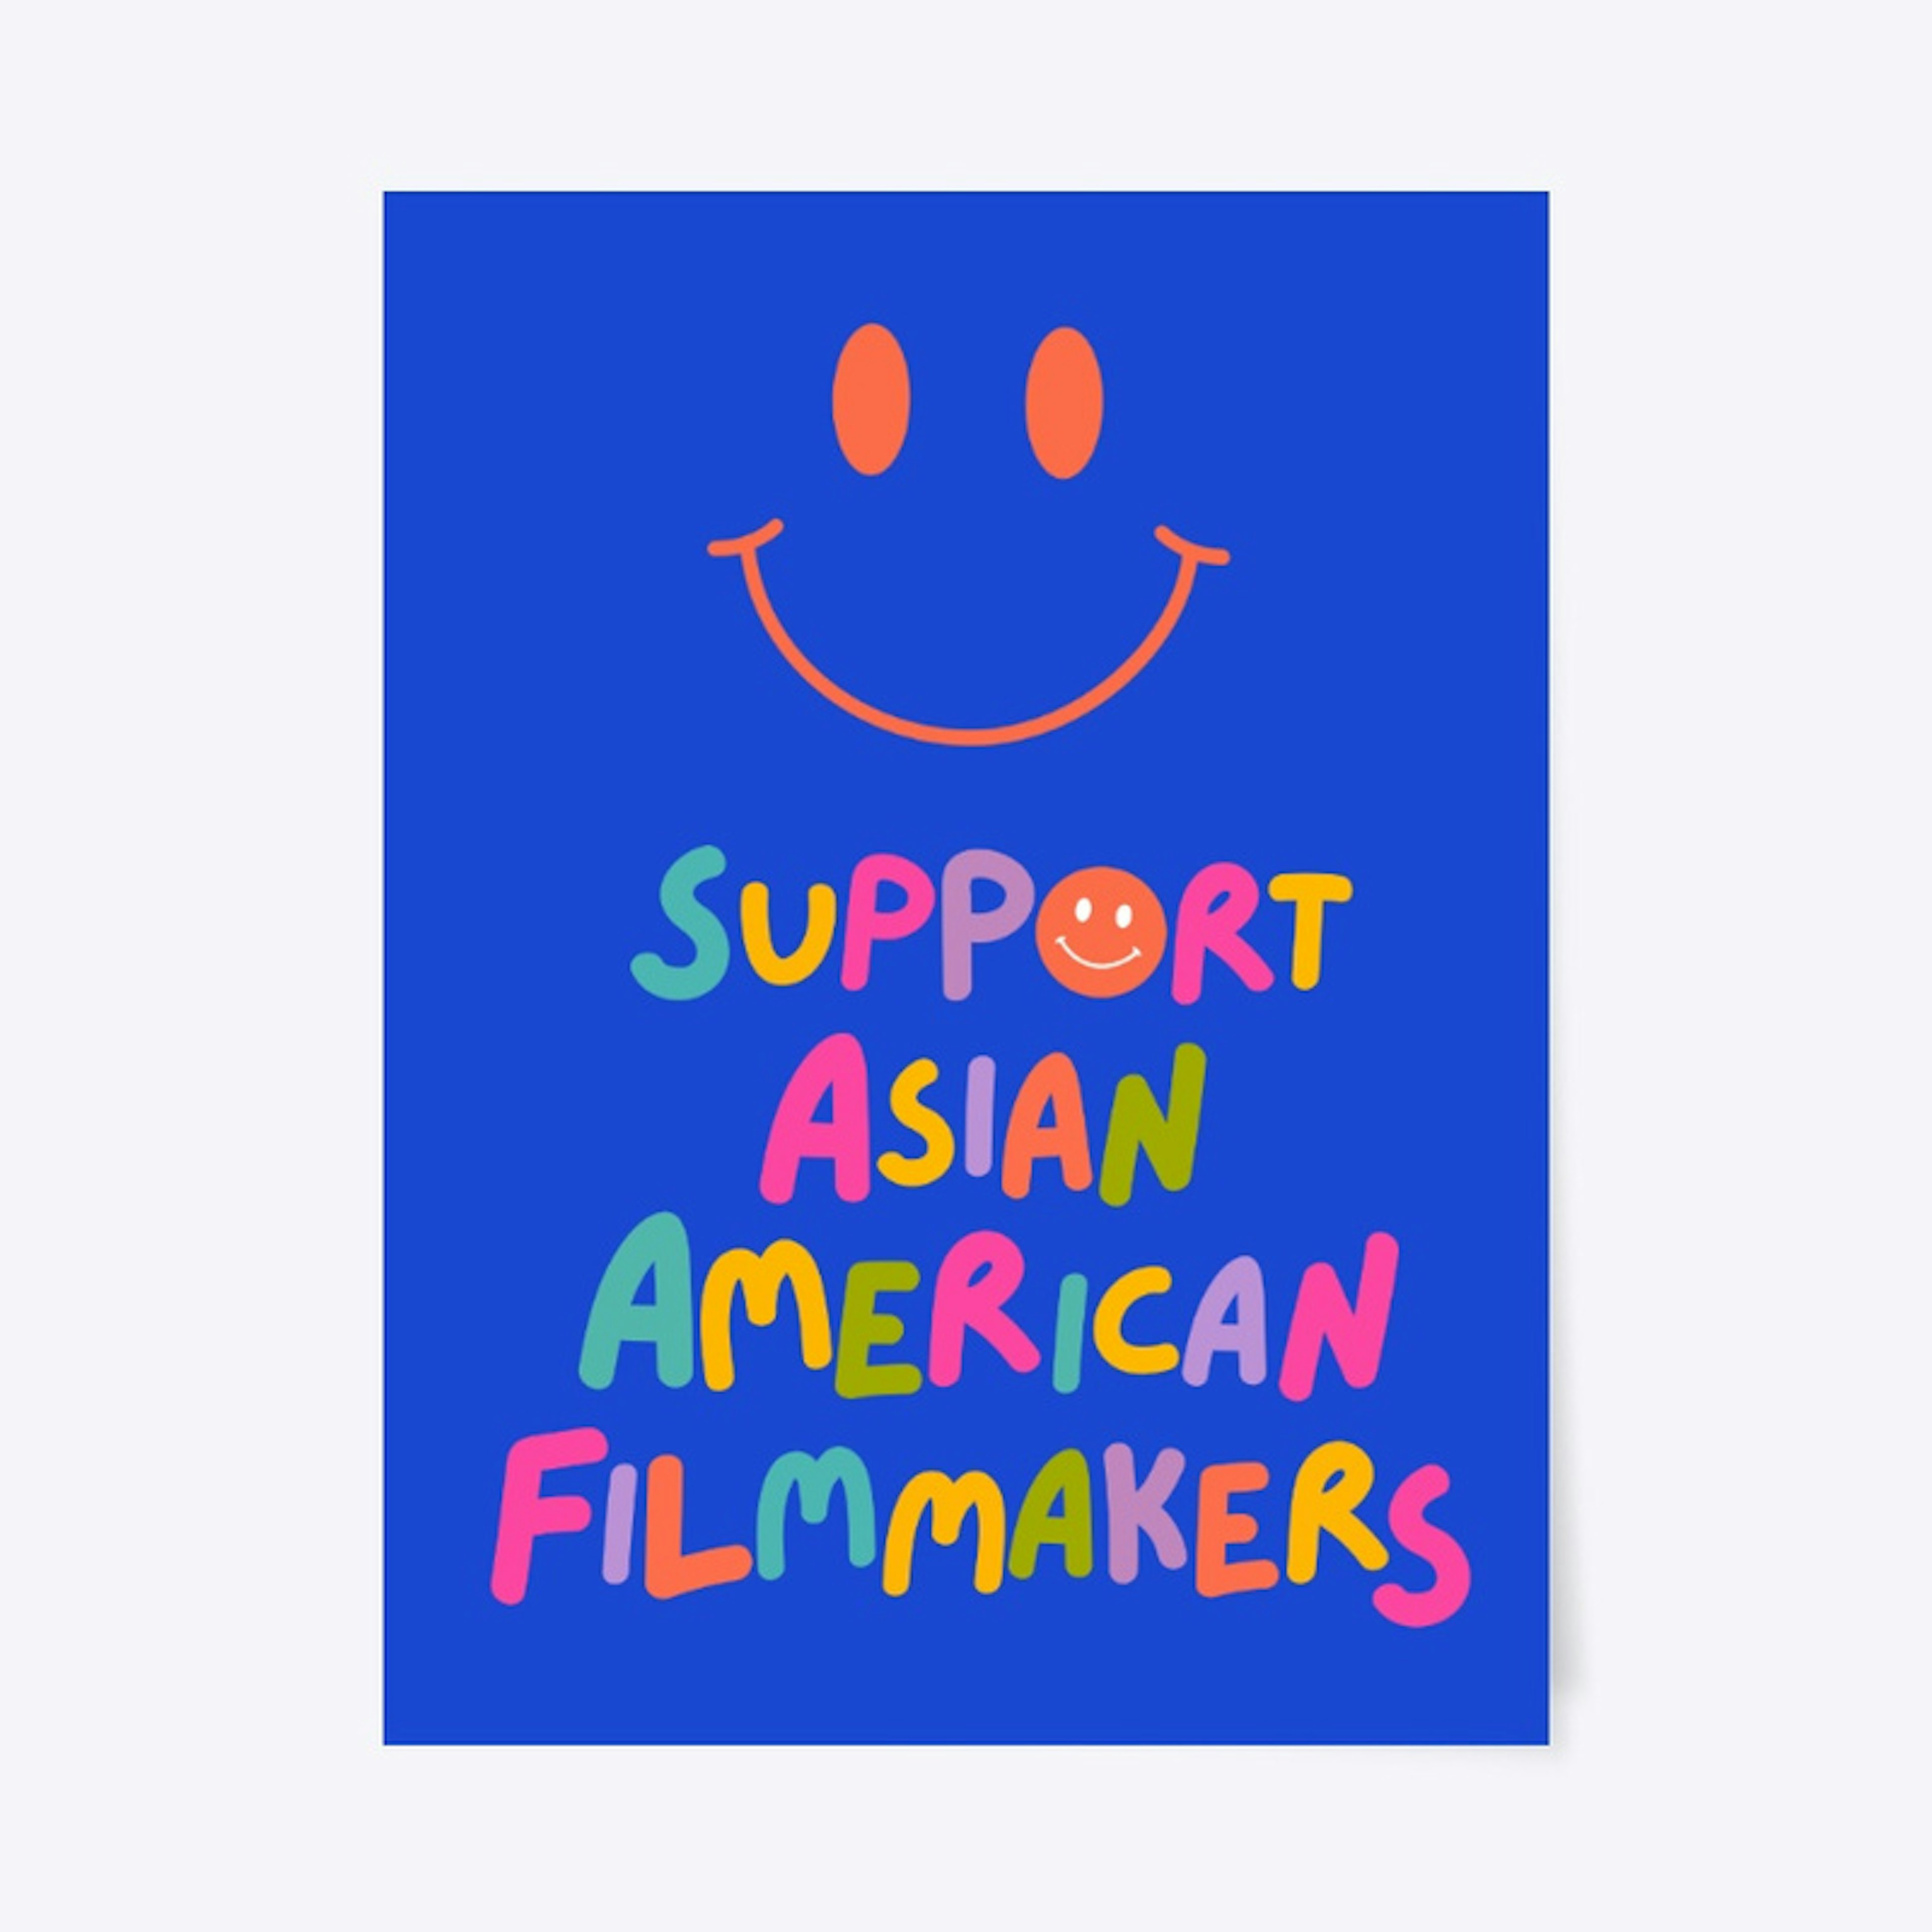 Support Asian American Filmmakers